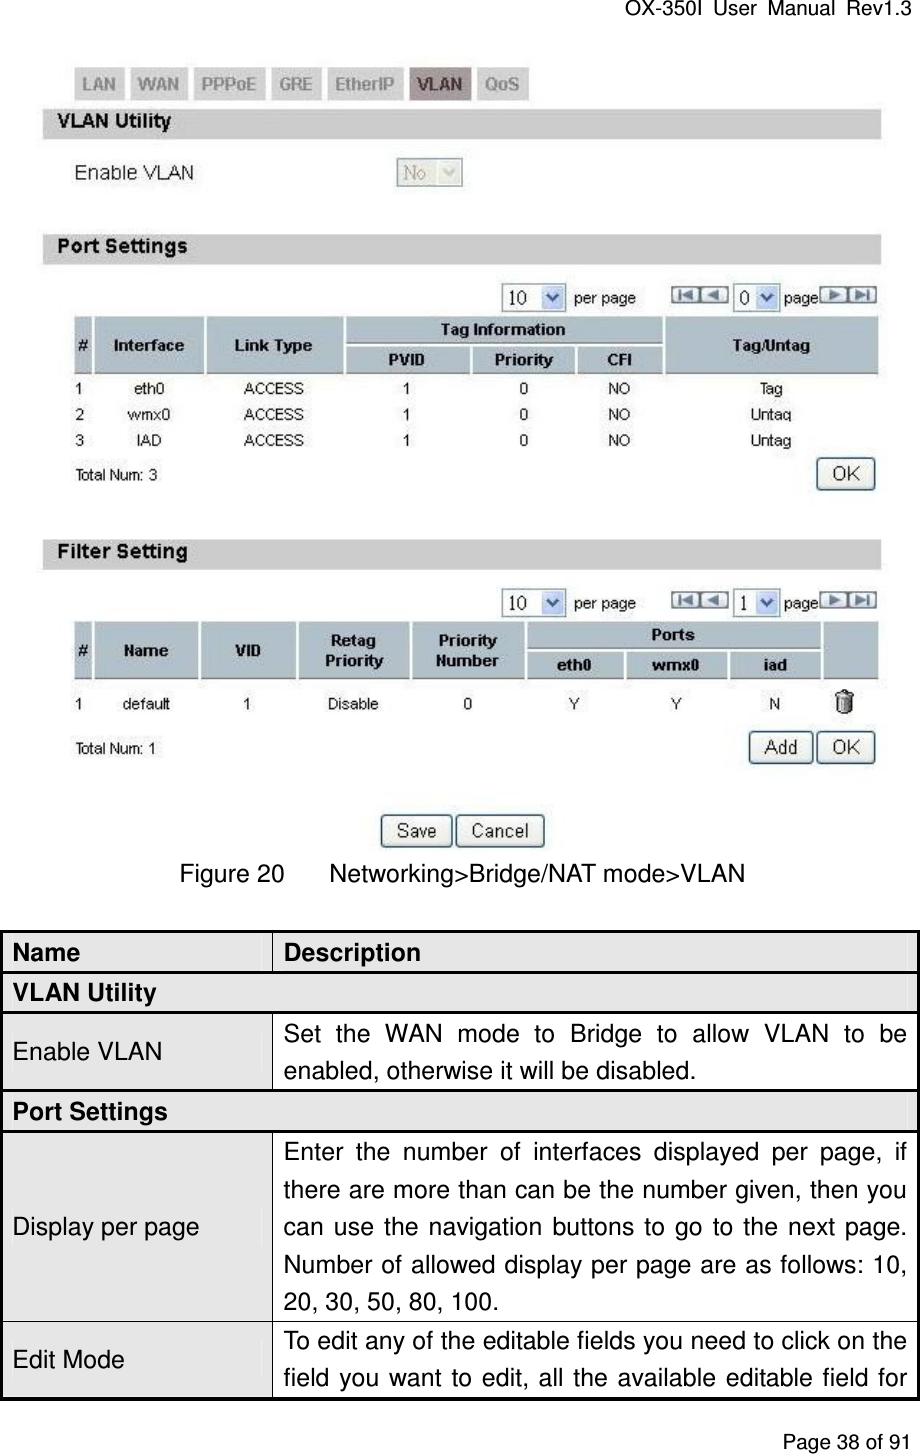 OX-350I  User  Manual  Rev1.3 Page 38 of 91  Figure 20  Networking&gt;Bridge/NAT mode&gt;VLAN Name  Description VLAN Utility Enable VLAN  Set  the  WAN  mode  to  Bridge  to  allow  VLAN  to  be enabled, otherwise it will be disabled. Port Settings Display per page Enter  the  number  of  interfaces  displayed  per  page,  if there are more than can be the number given, then you can  use  the  navigation  buttons to go  to the  next page. Number of allowed display per page are as follows: 10, 20, 30, 50, 80, 100. Edit Mode  To edit any of the editable fields you need to click on the field  you want  to edit, all  the available editable field for 